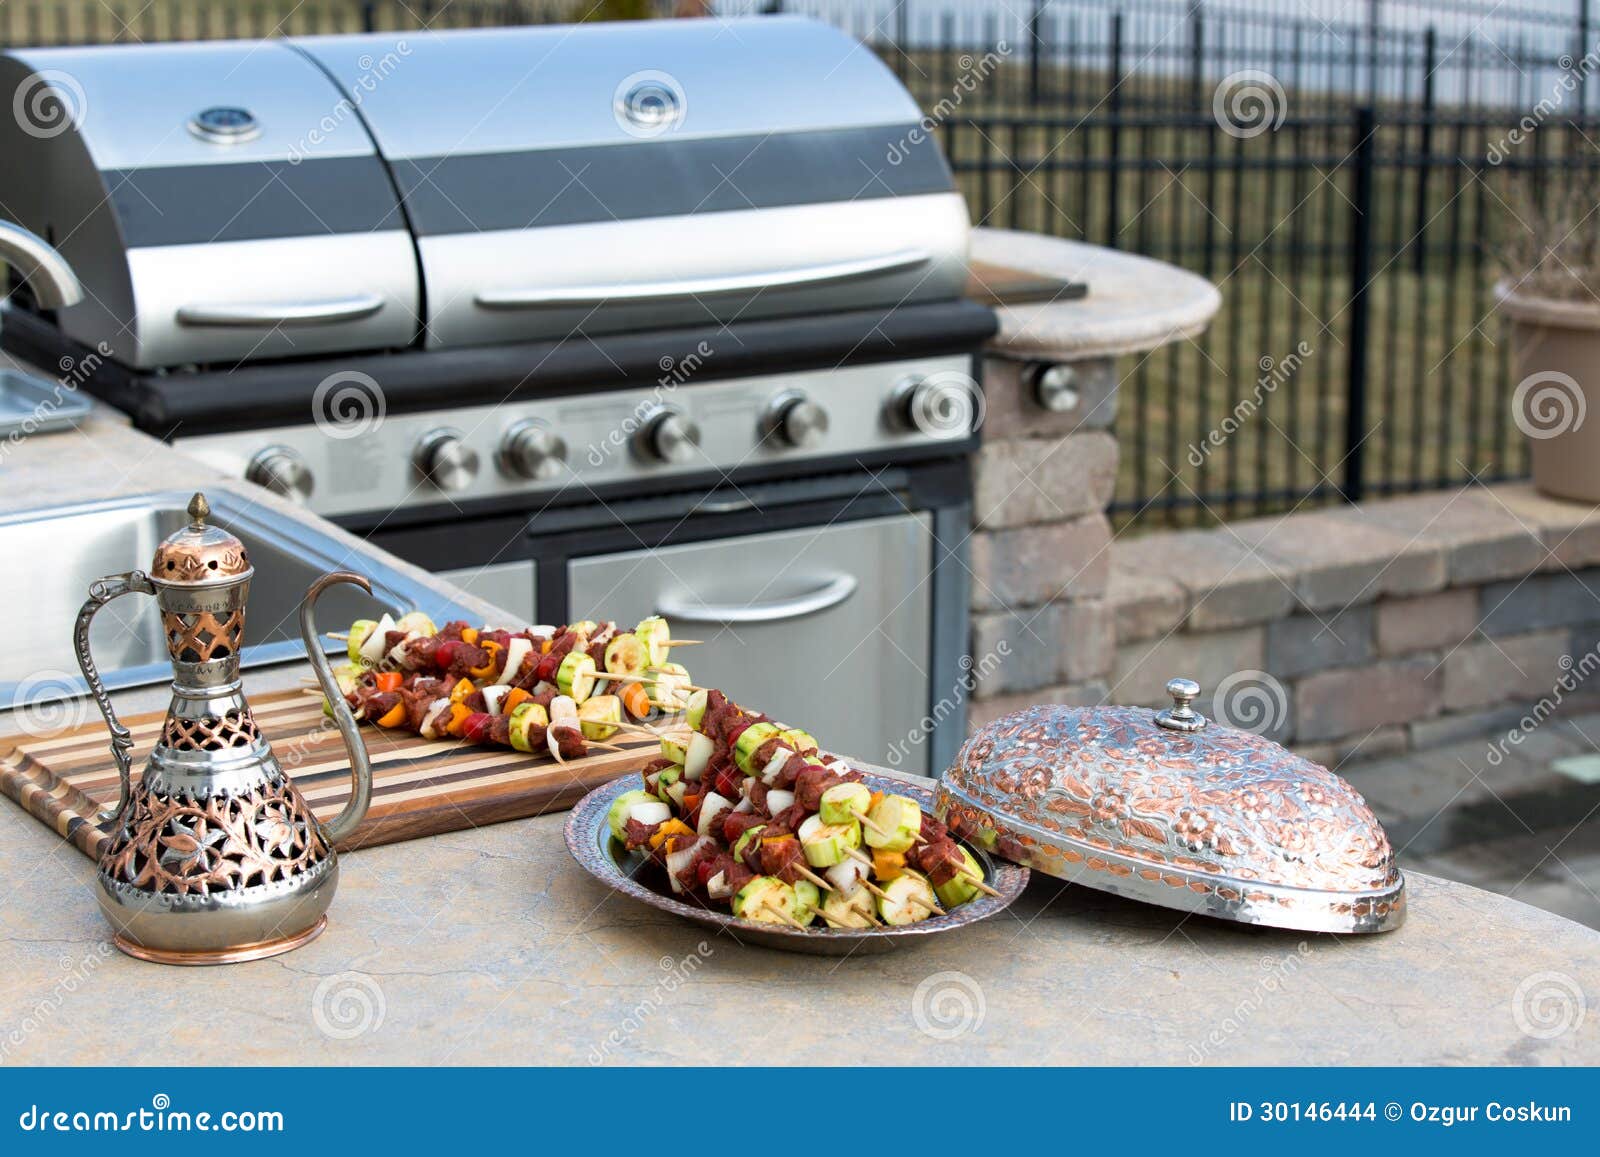 skewers and outdoor kitchen